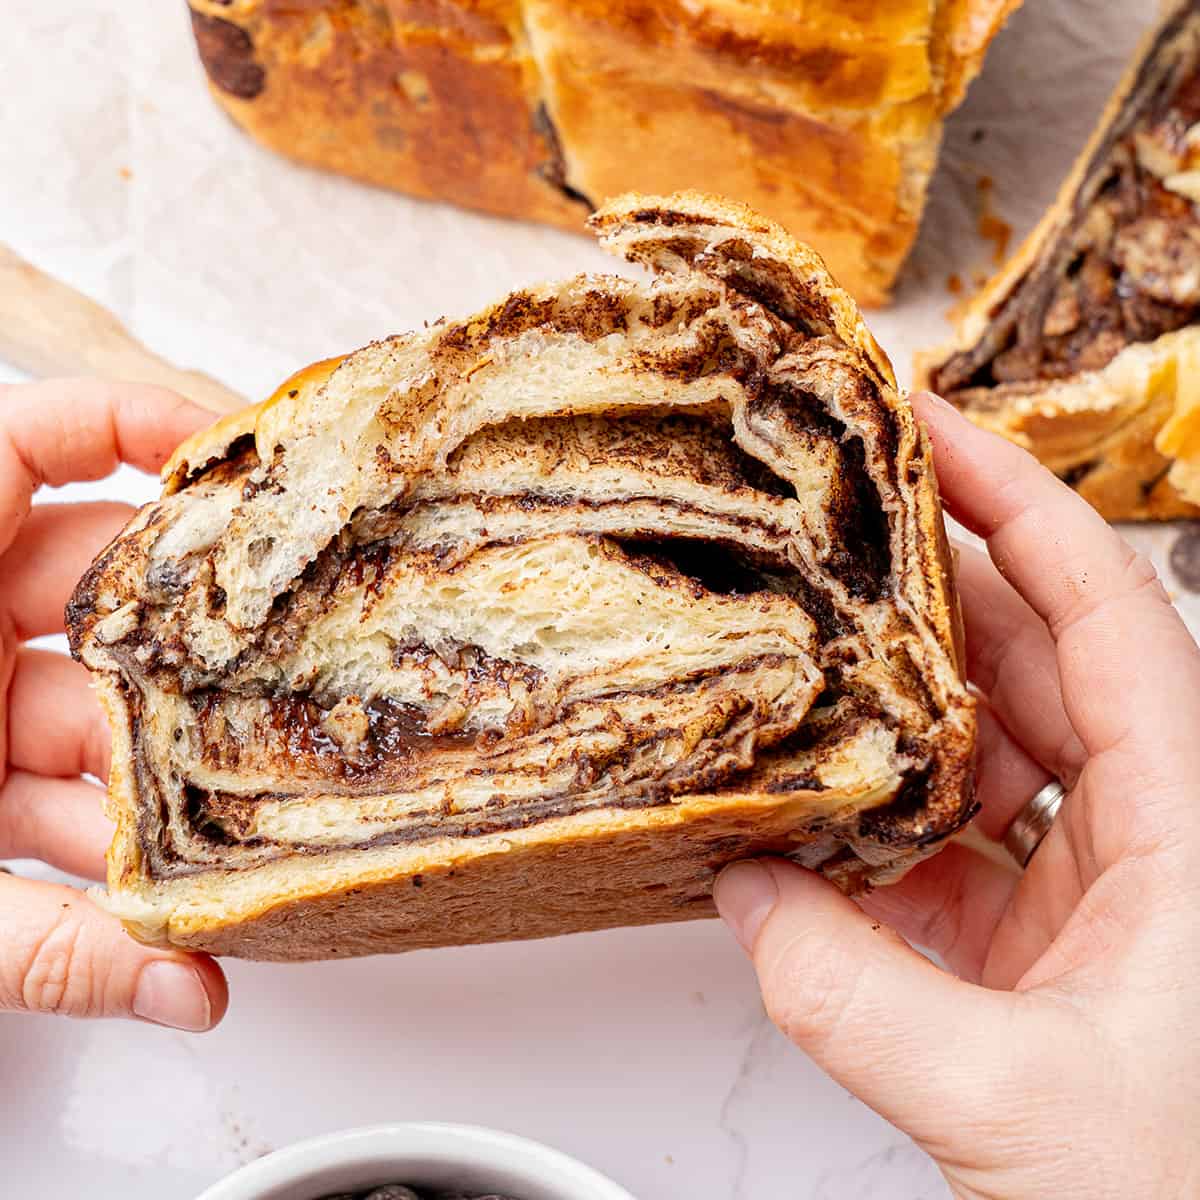 A hand holding a slice of chocolate brioche.